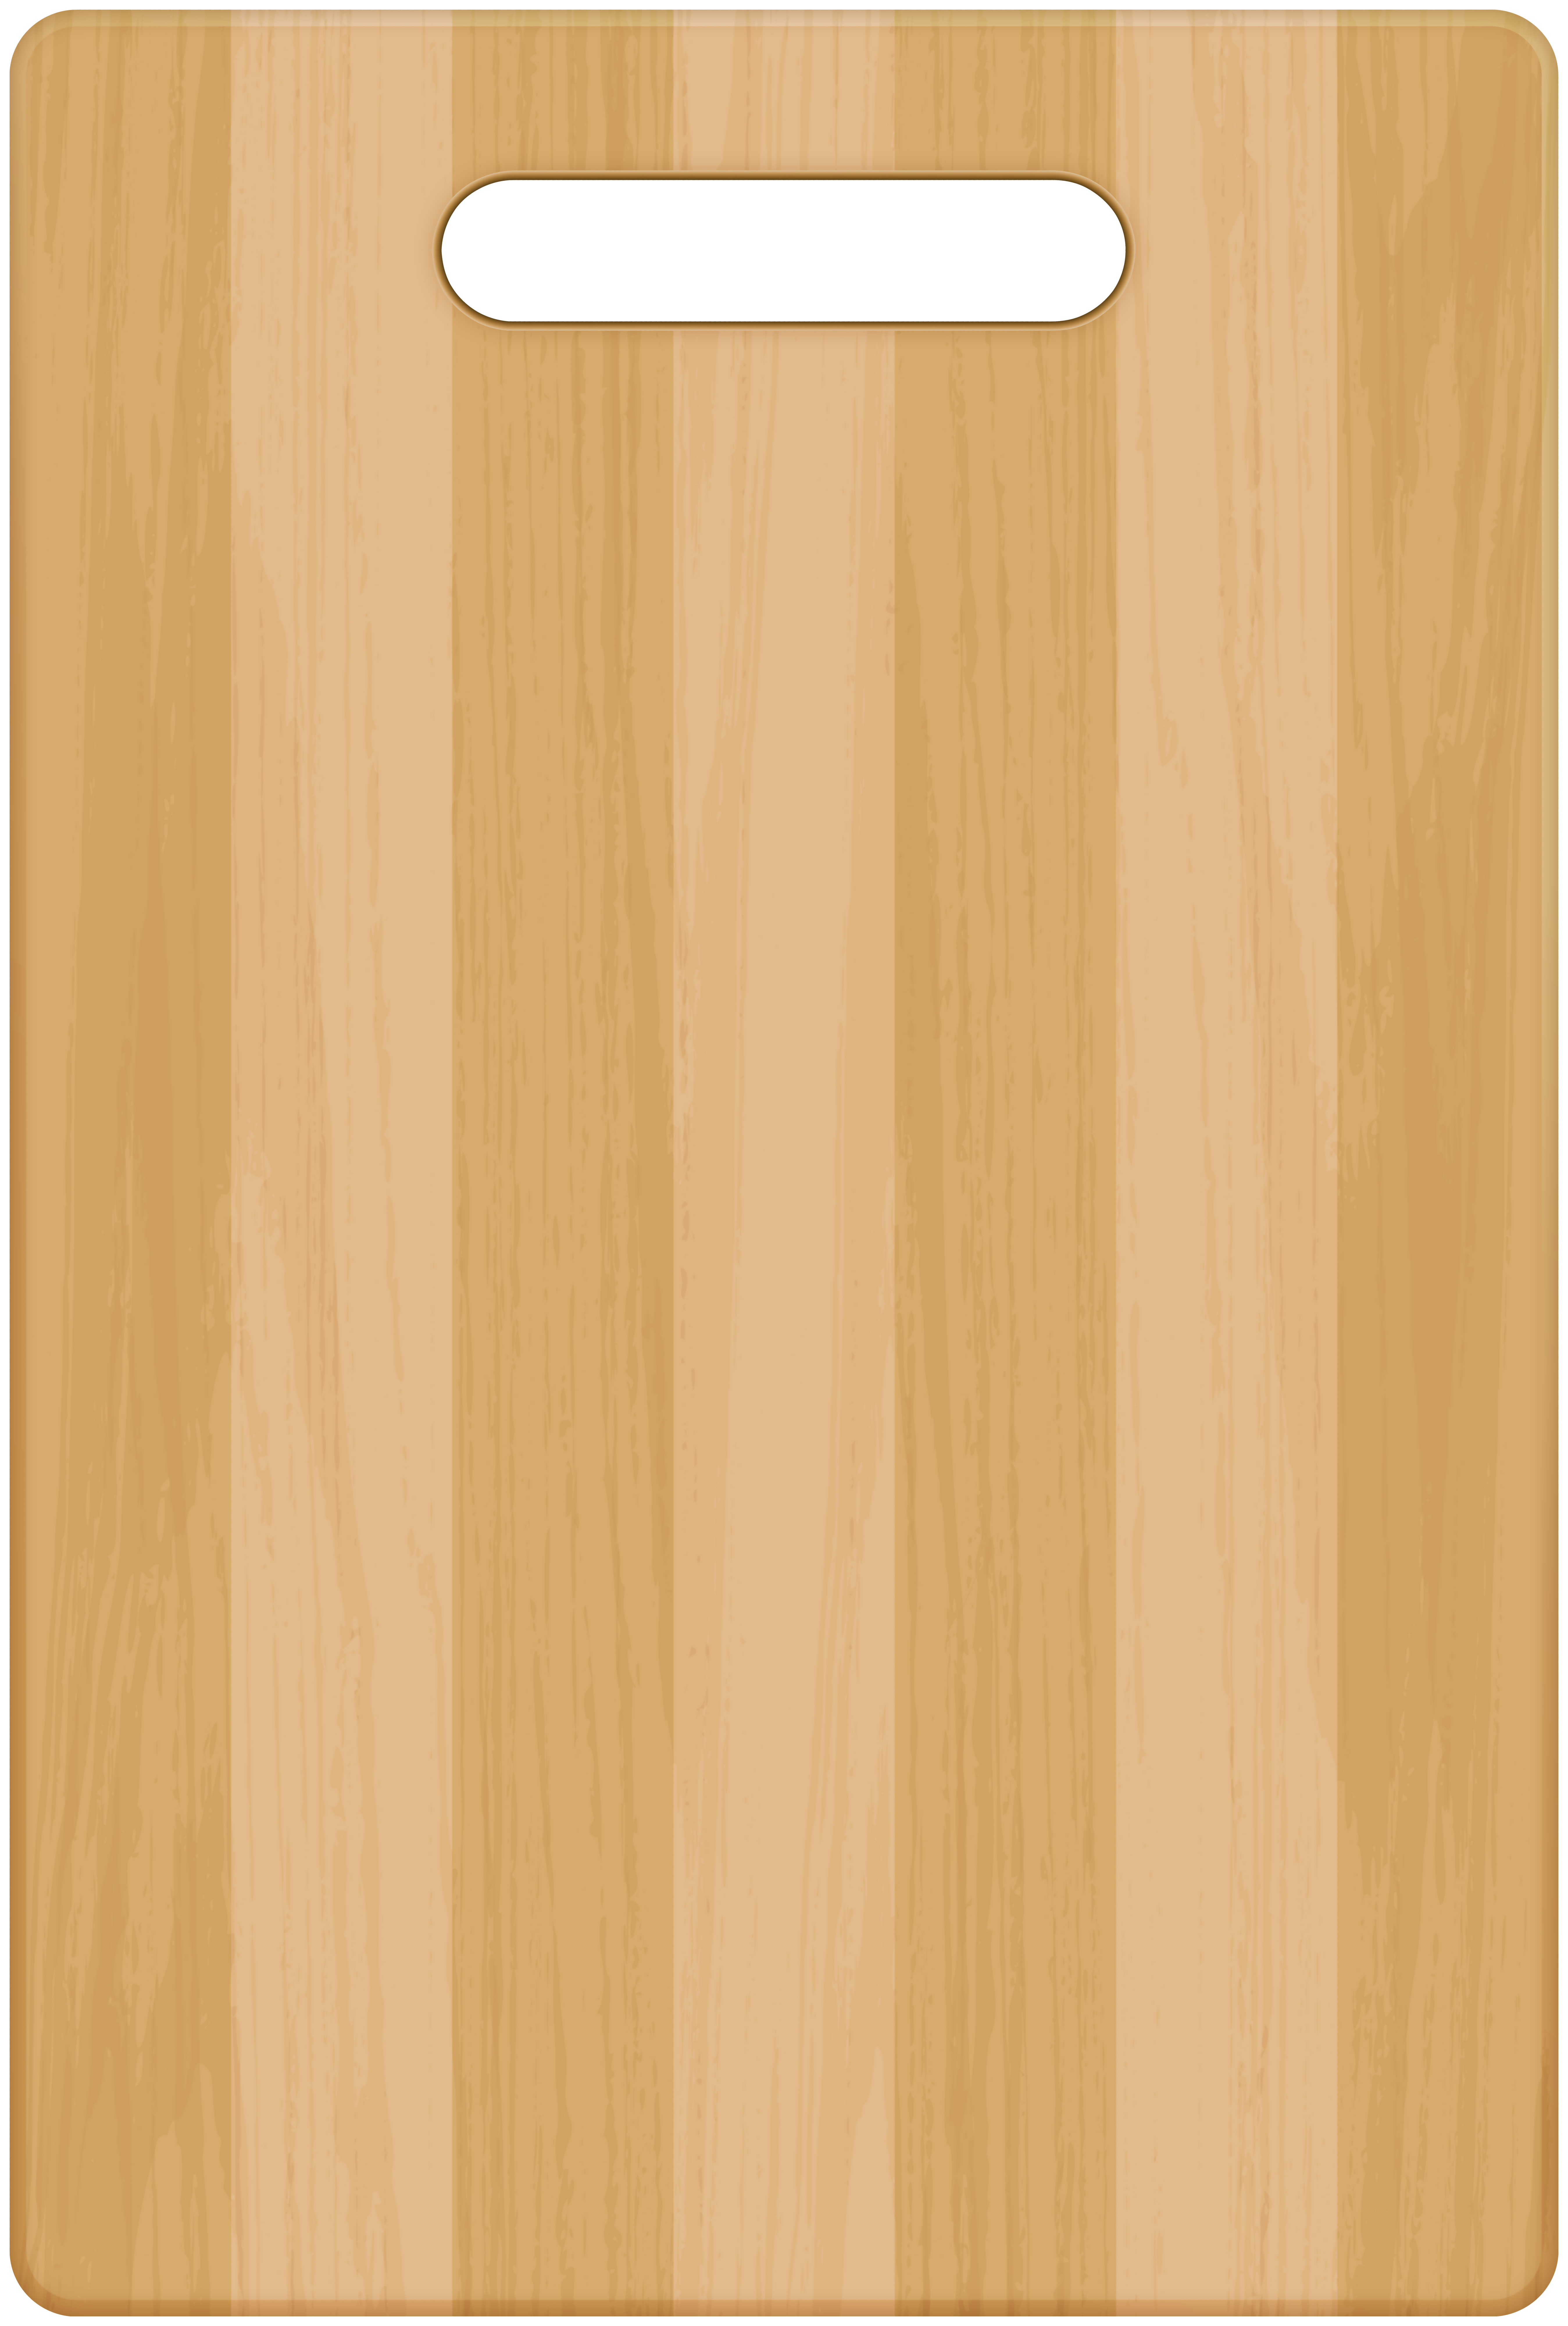 https://clipart-library.com/8300/1931/Wood_Cutting_Board_PNG_Clipart-2807.png